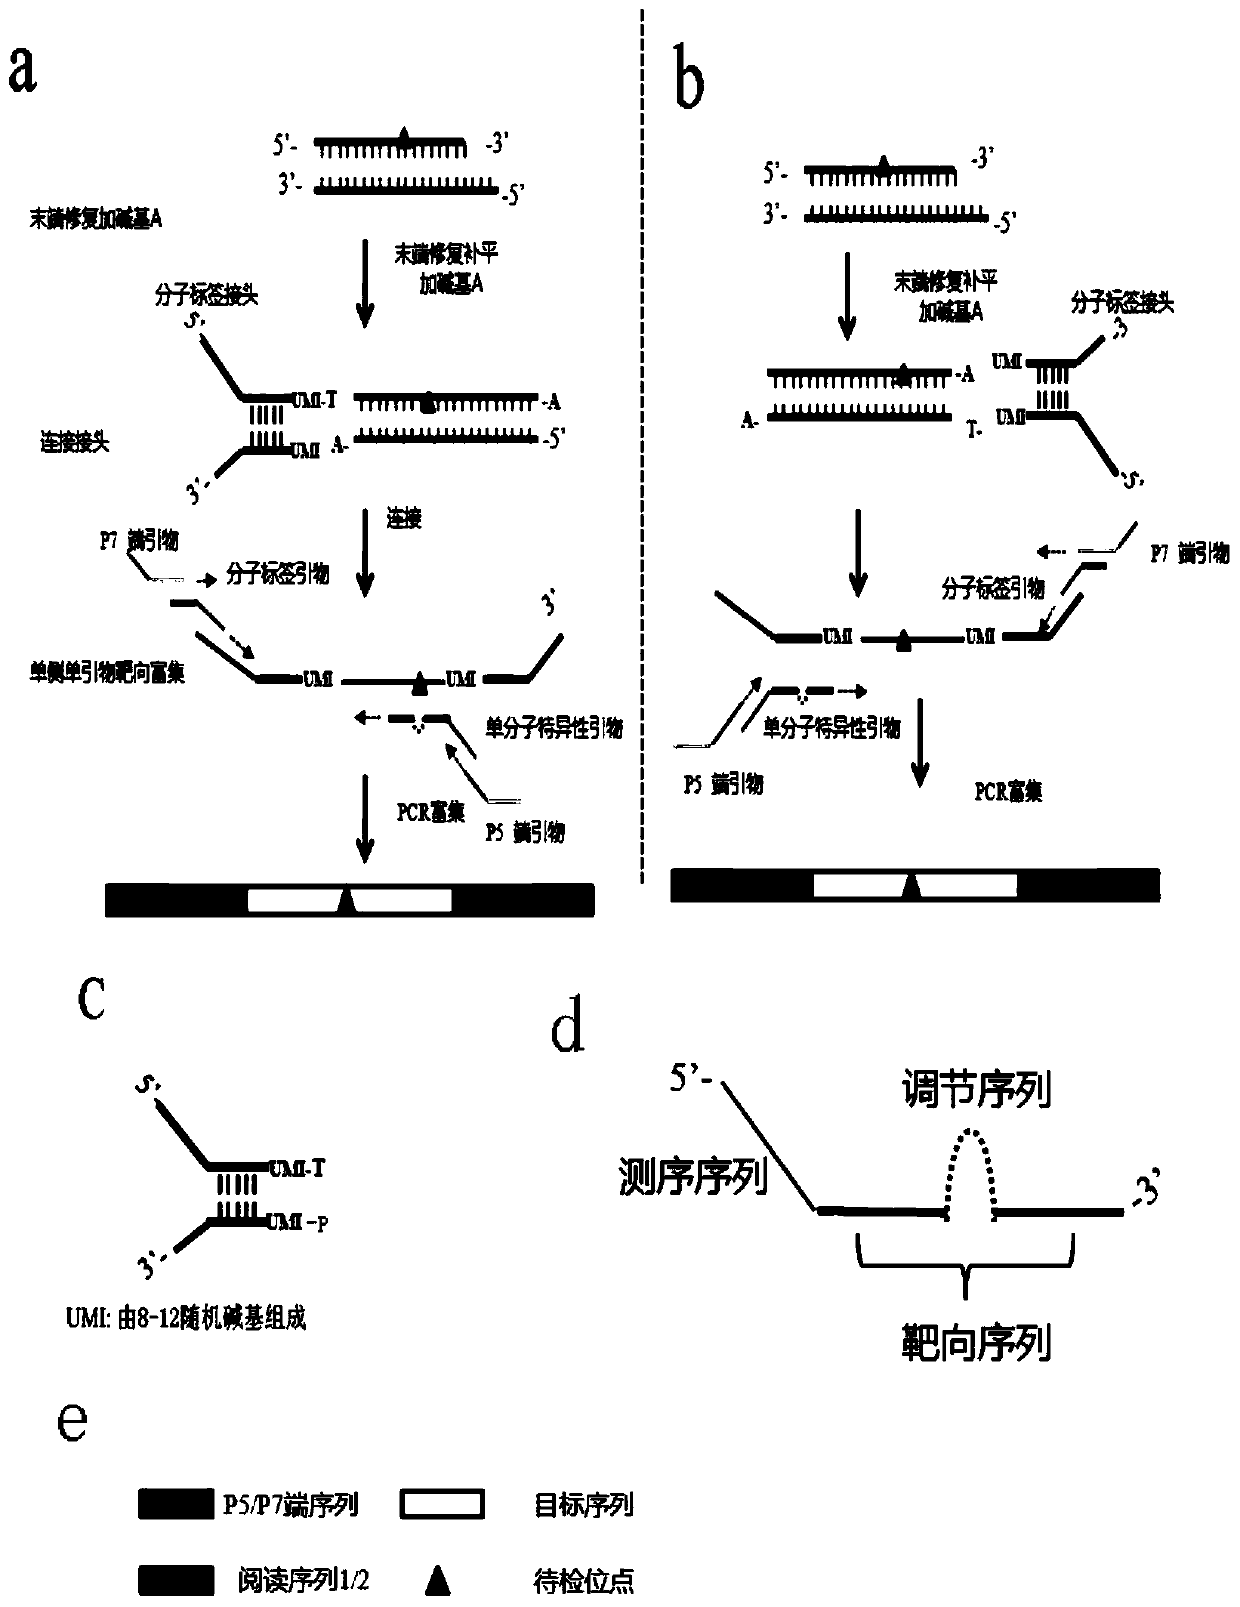 Ultra-low frequency mutant nucleic acid fragment detection method, library construction method, primer design method and reagent